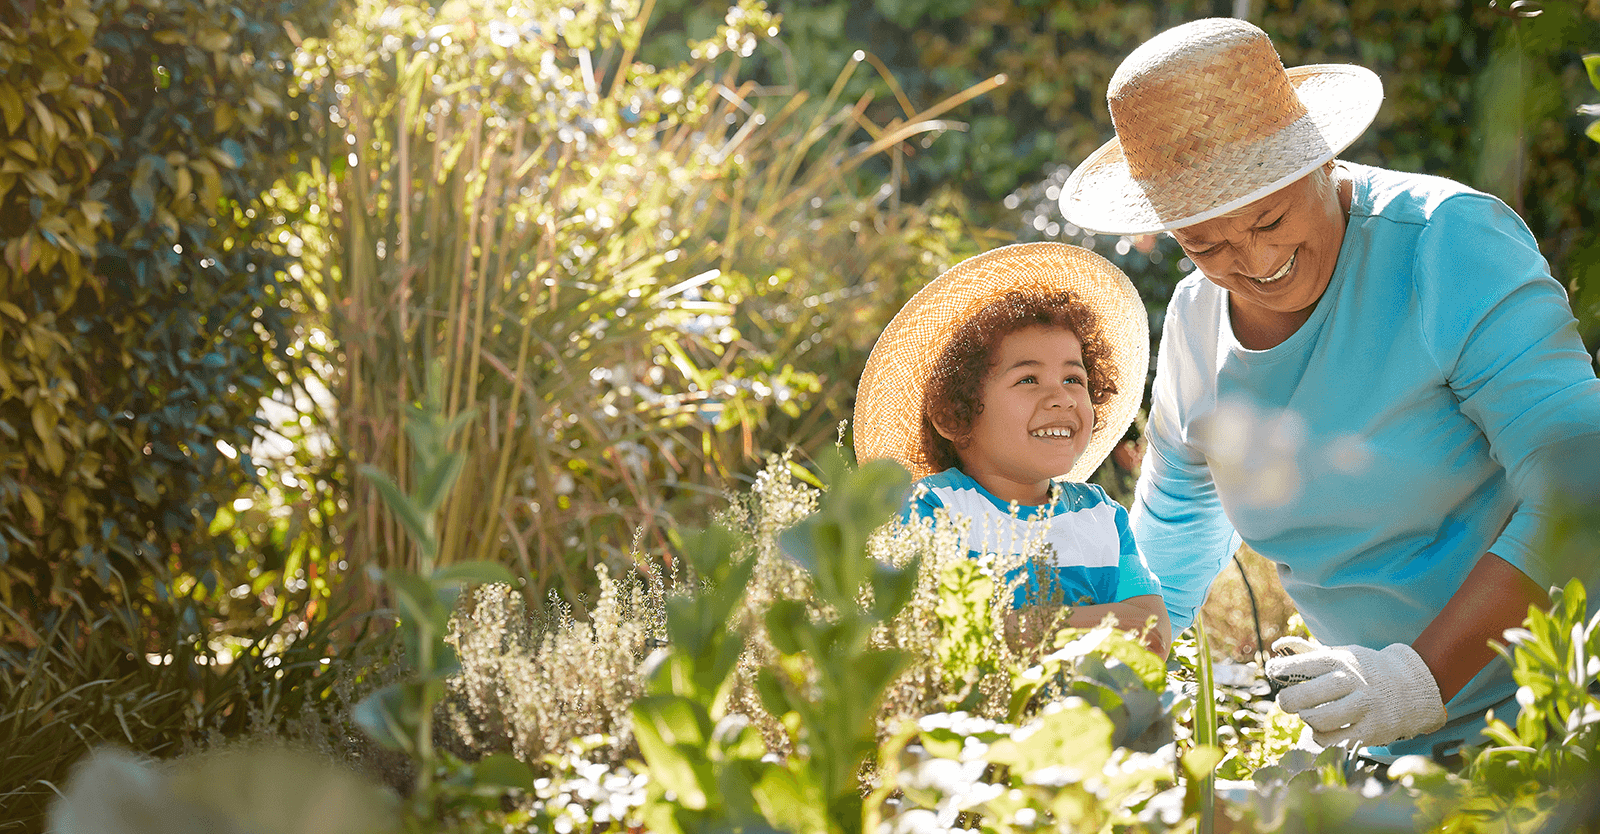 A grandmother and young grandchild wearing straw hats sit together among tall plants in a garden.